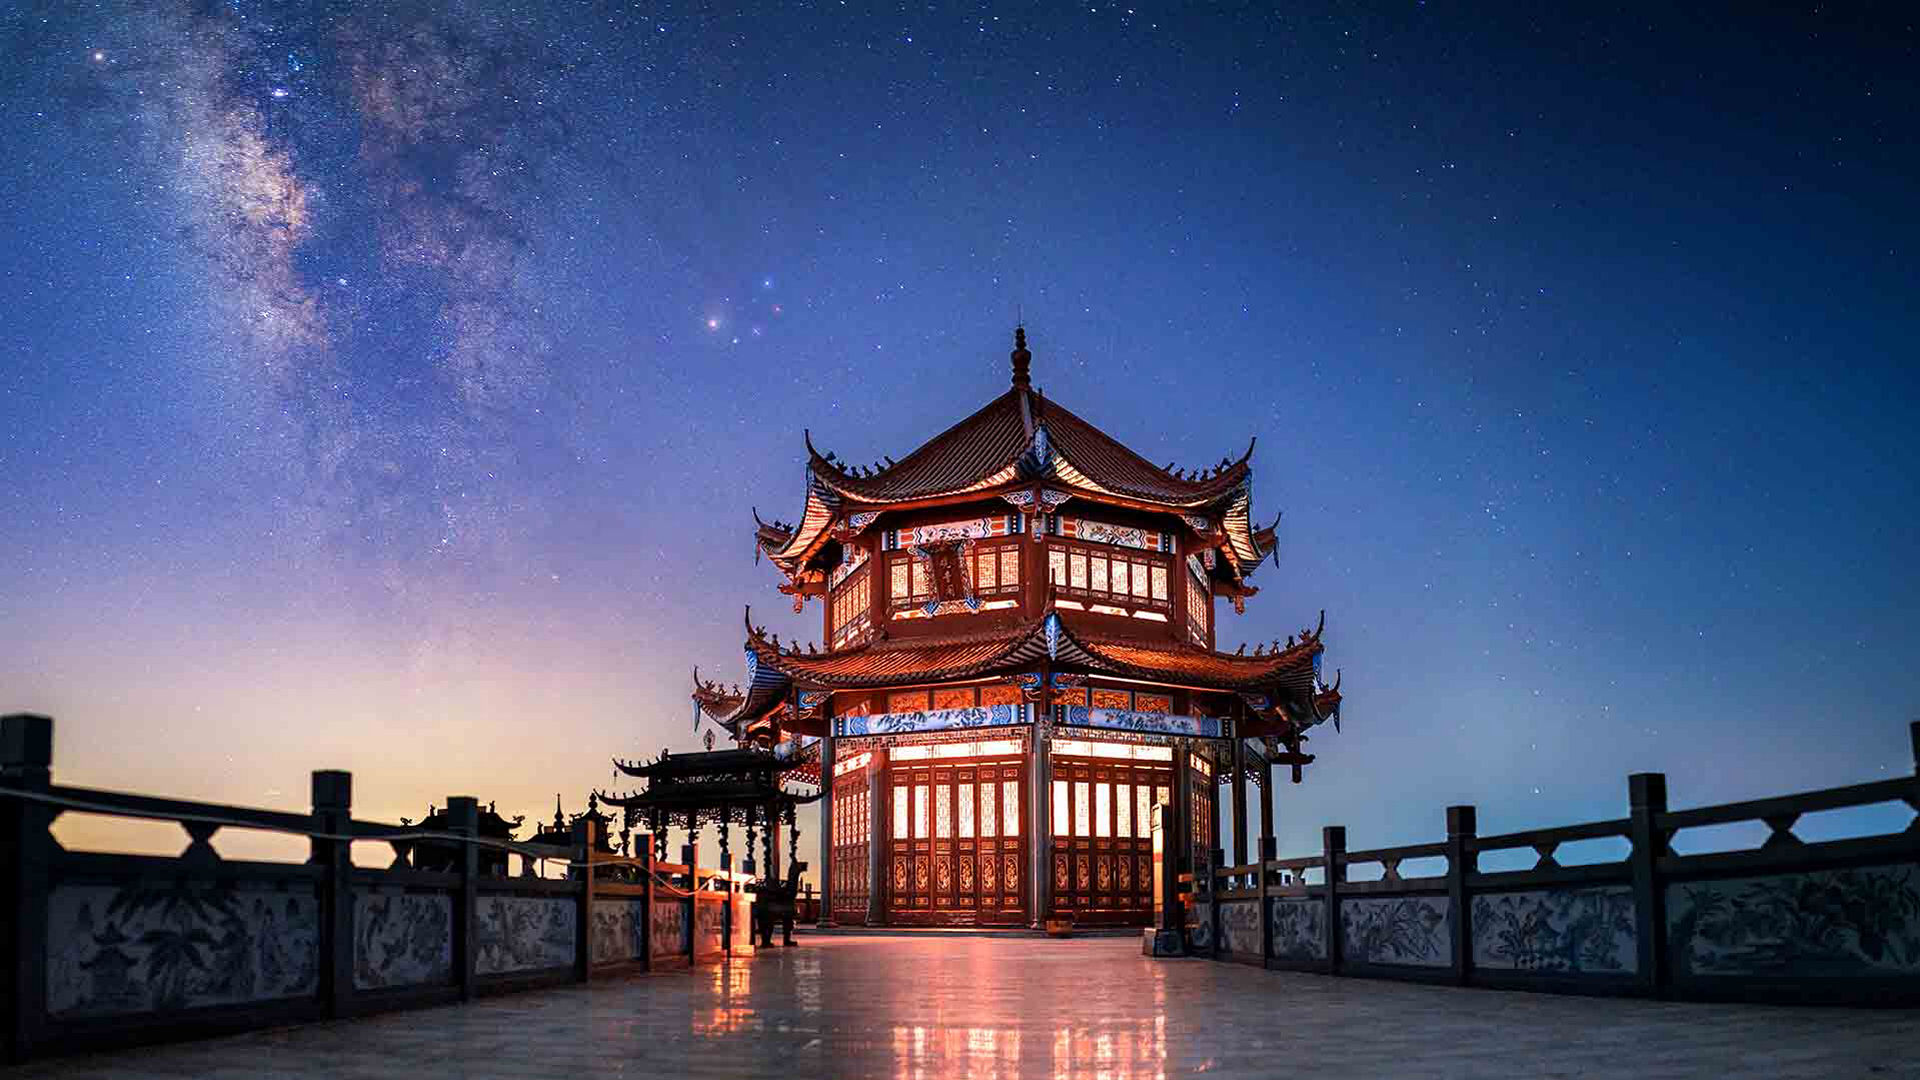 Chinese New Year 2021 in Terms of Astronomy